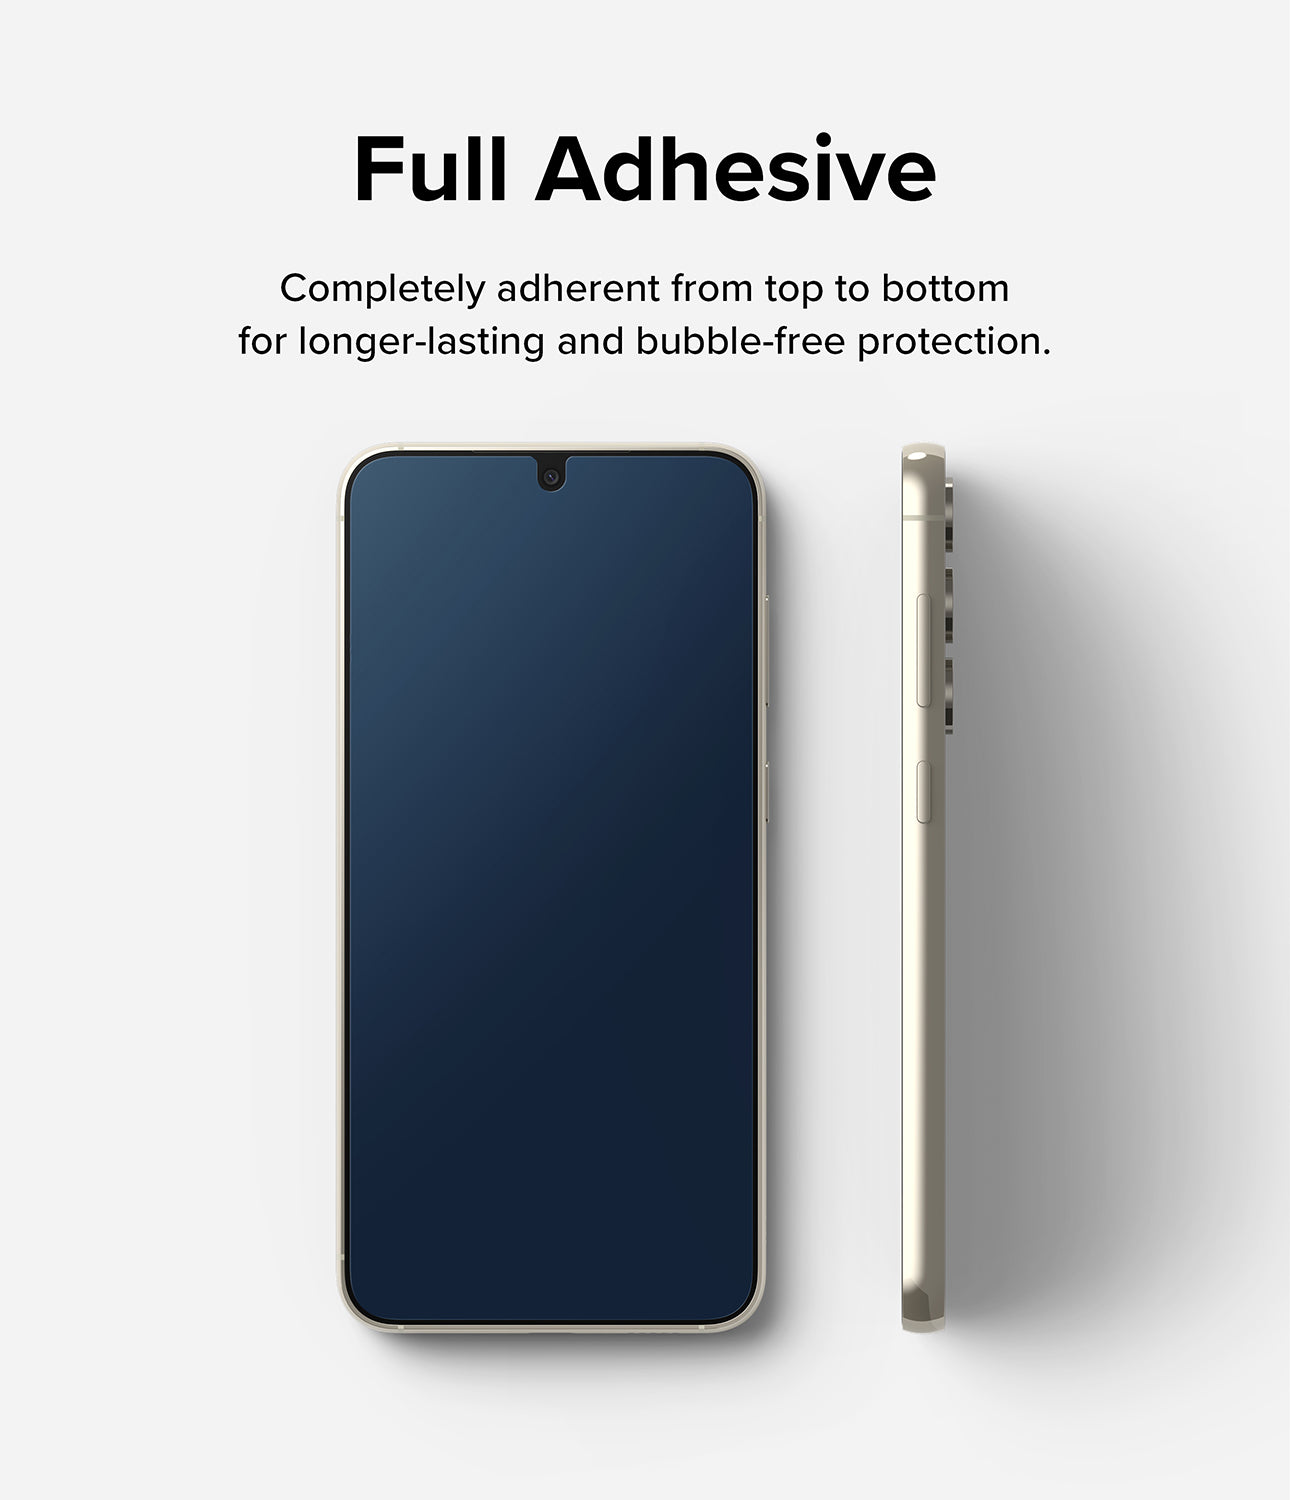 Full Adhesive l Completely adherent from top to bottom for longer-lasting and bubble-free protection.